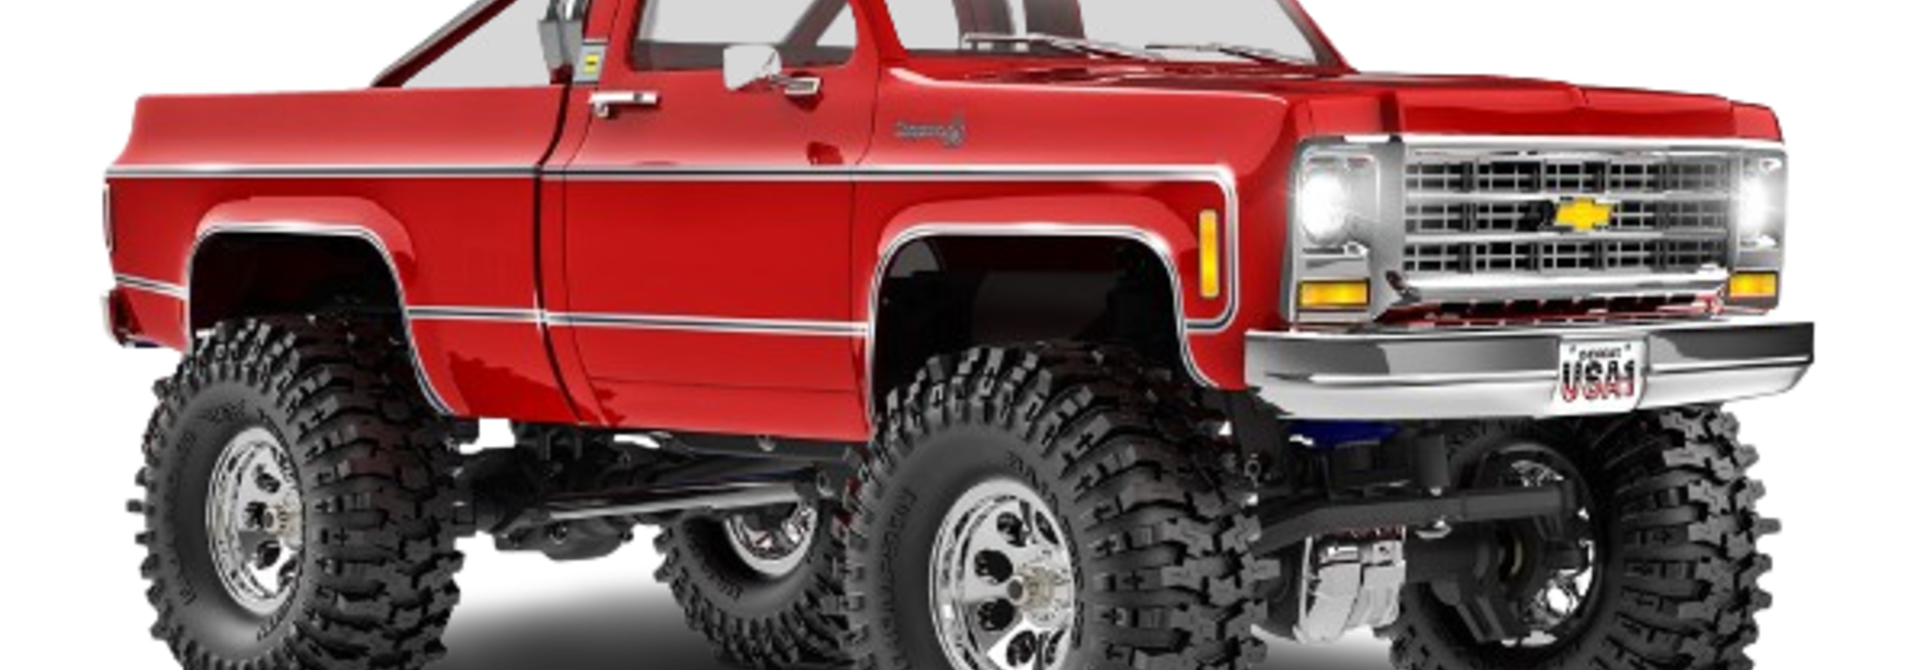 TRX-4M™ High Trail Crawler with 1979 Chevrolet® K10 Truck Body: 1/18-Scale 4WD Electric Truck Red TRX97064-1RED